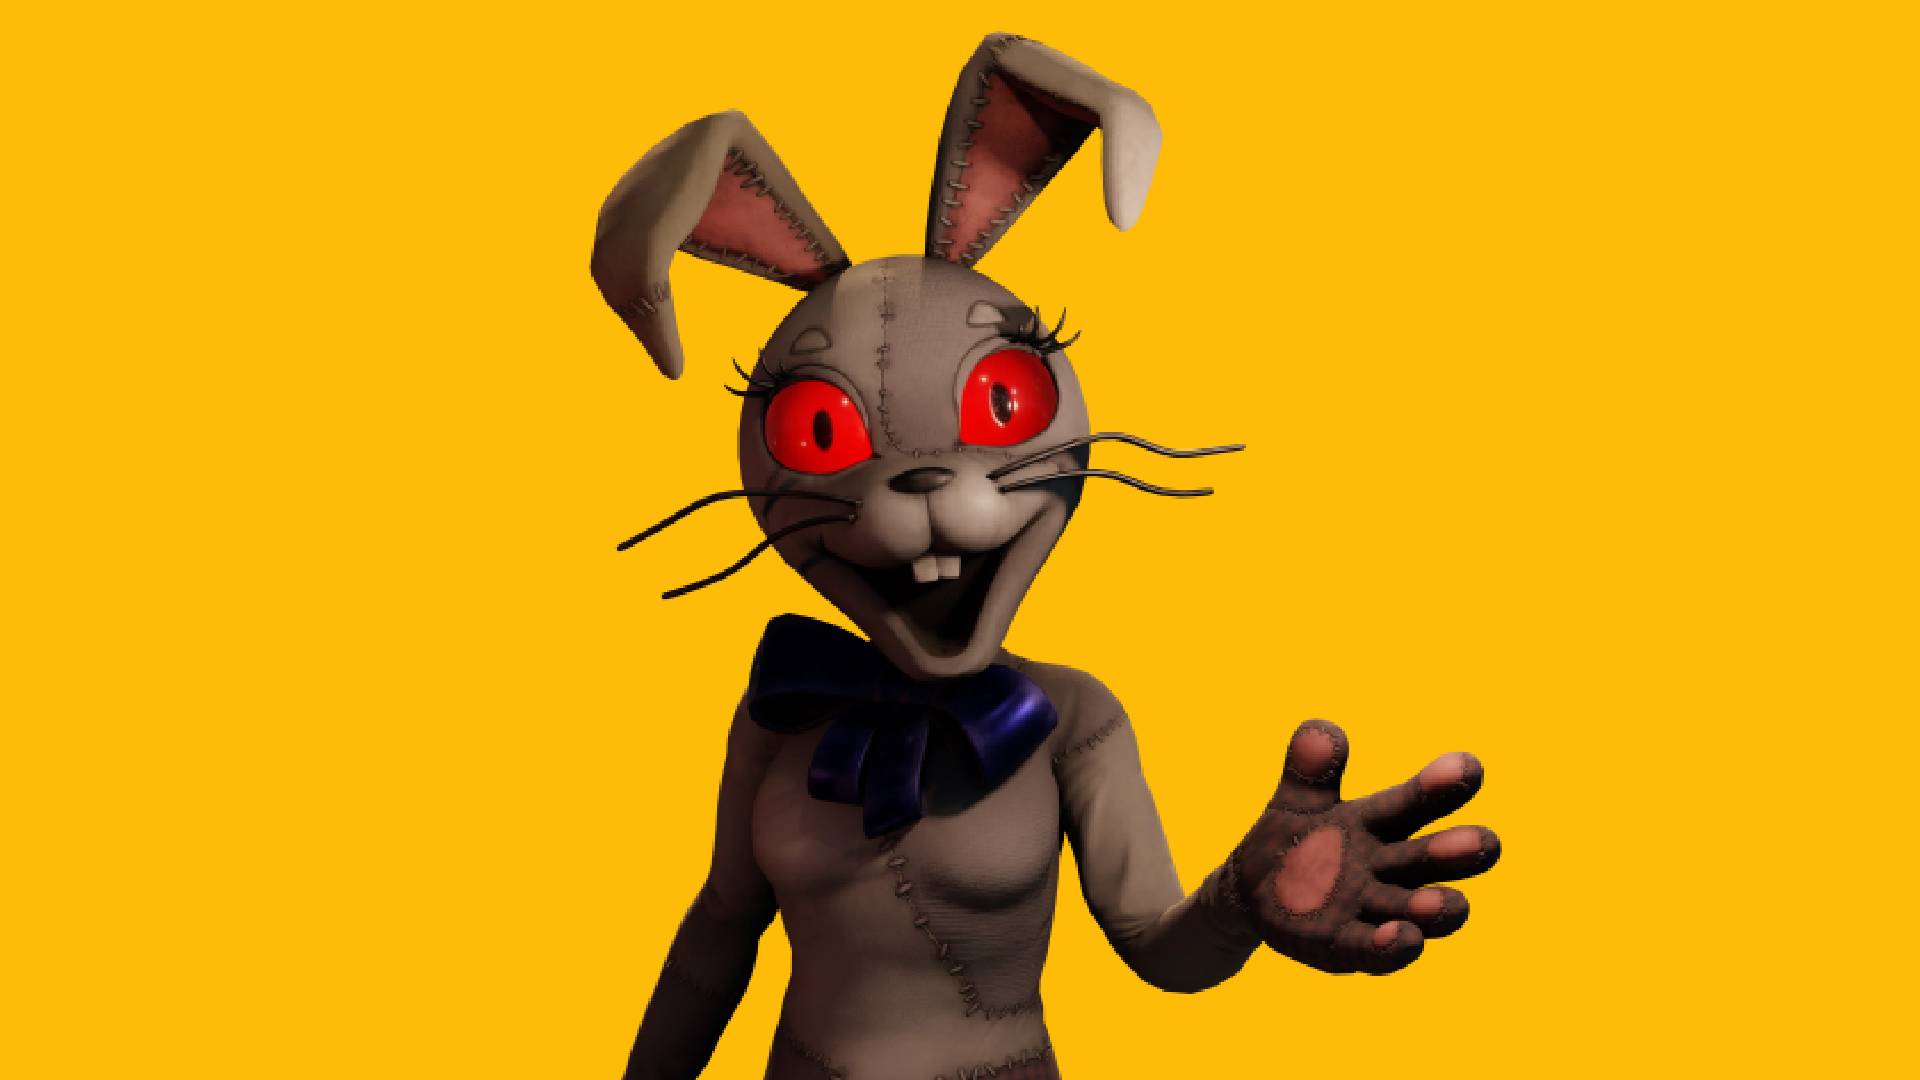 Gregory be the psycho bunny  Five Nights at Freddy's: Security